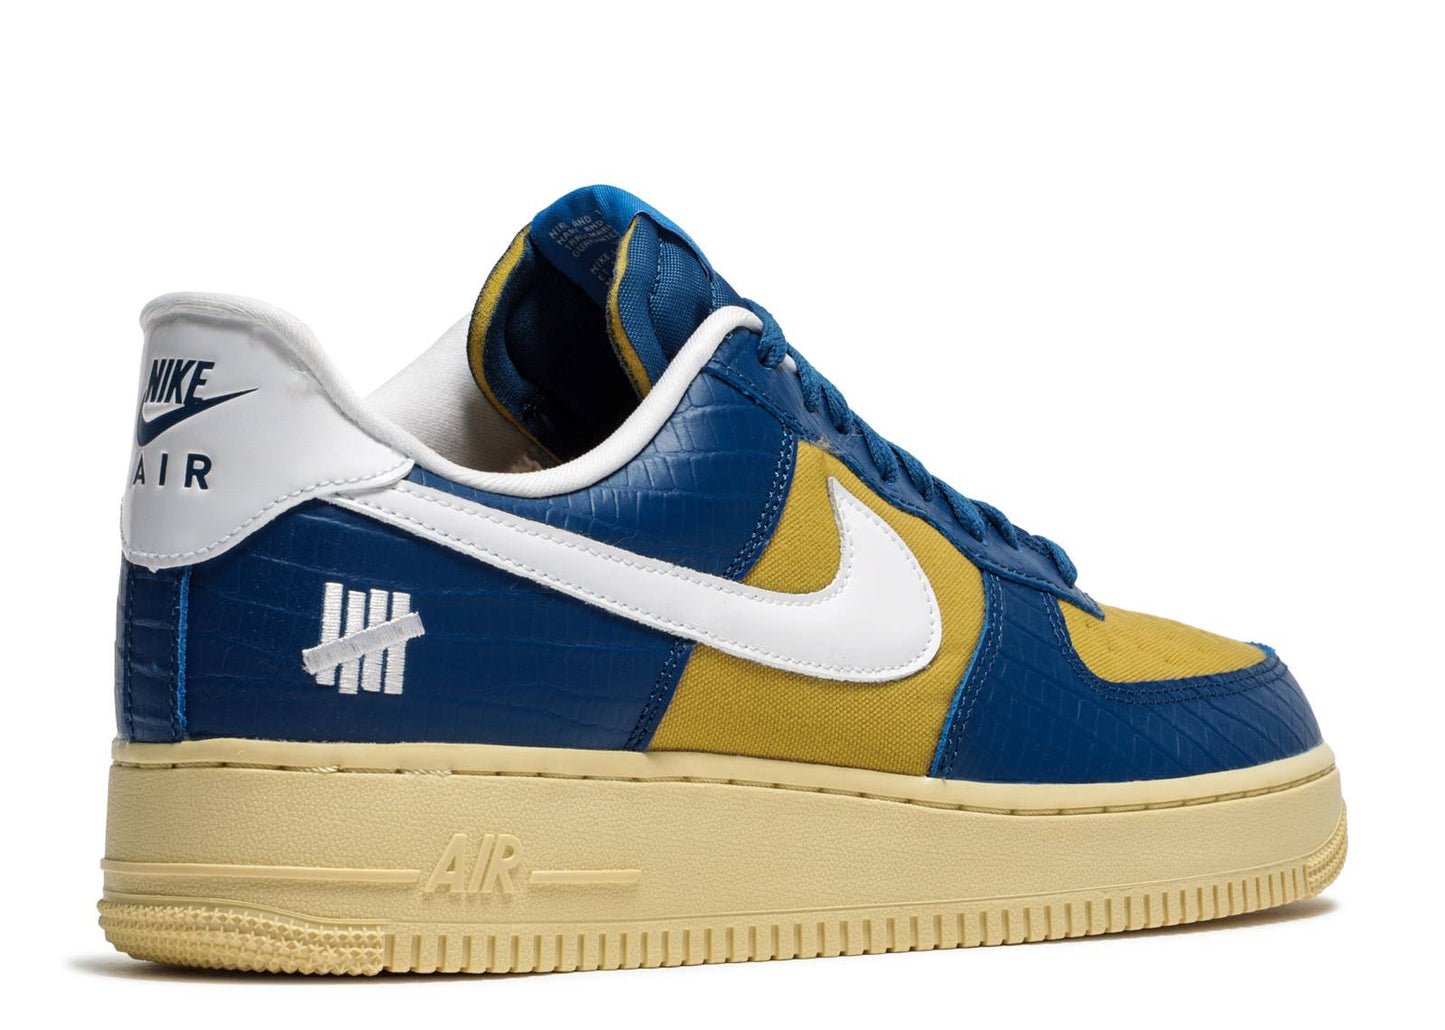 Undefeated x Nike Air Force 1 Low "5 On It Blue/Yellow"